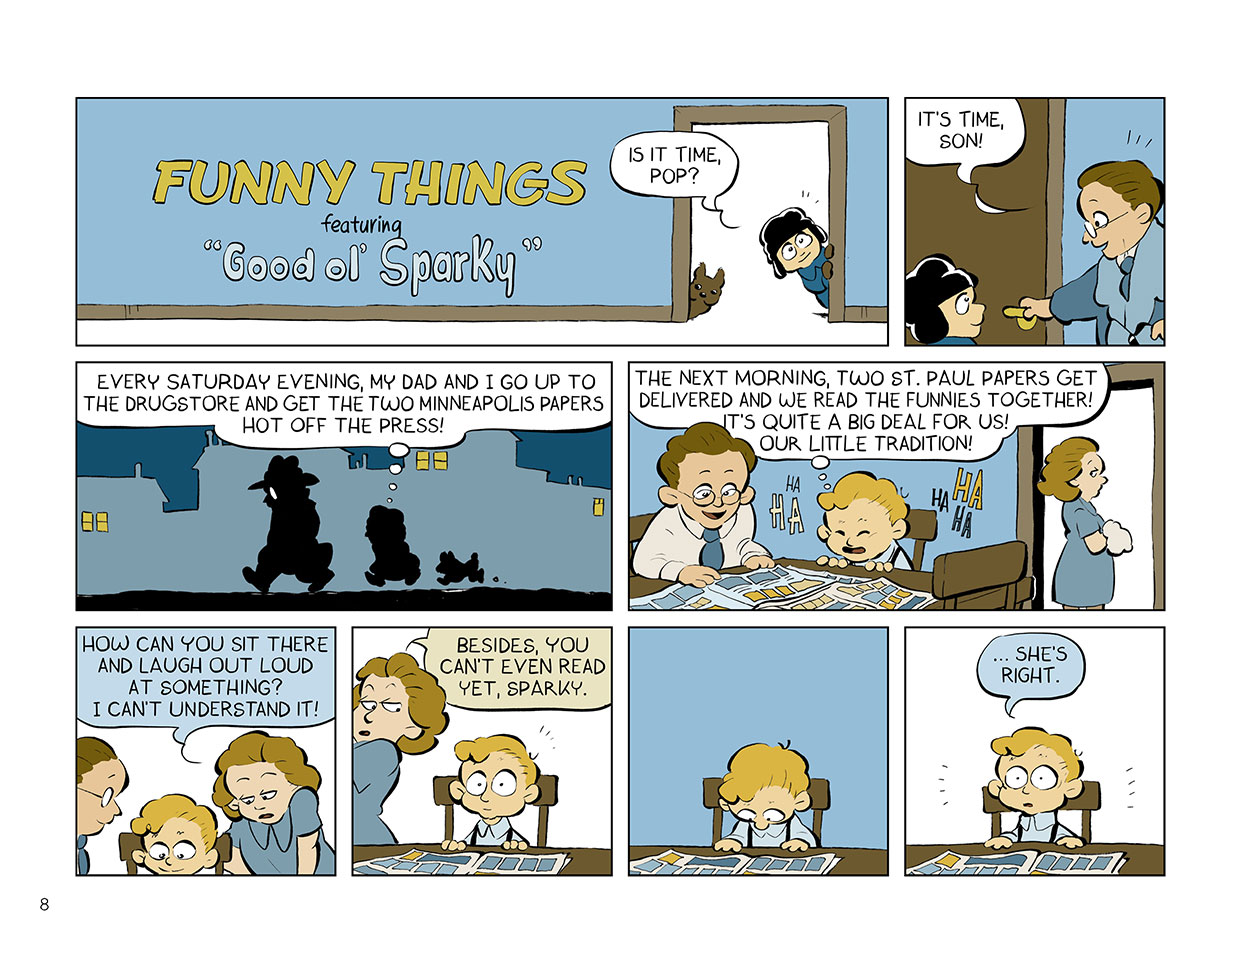 Funny Things: A Comic Strip Biography of Charles M. Schulz  - Page 1